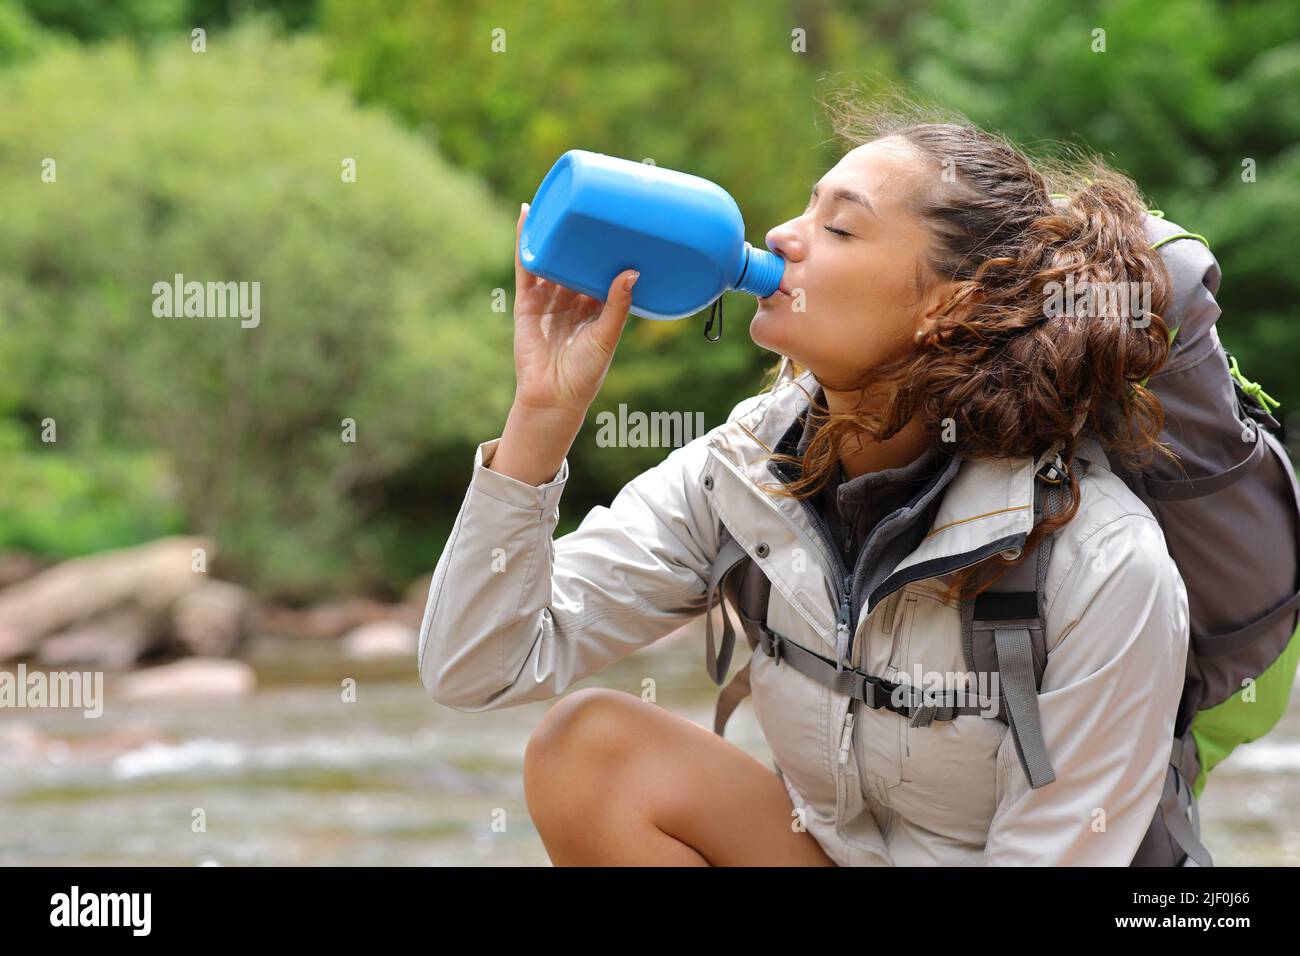 Side view portrait of a tekker drinking water from bottle in a river Stock Photo